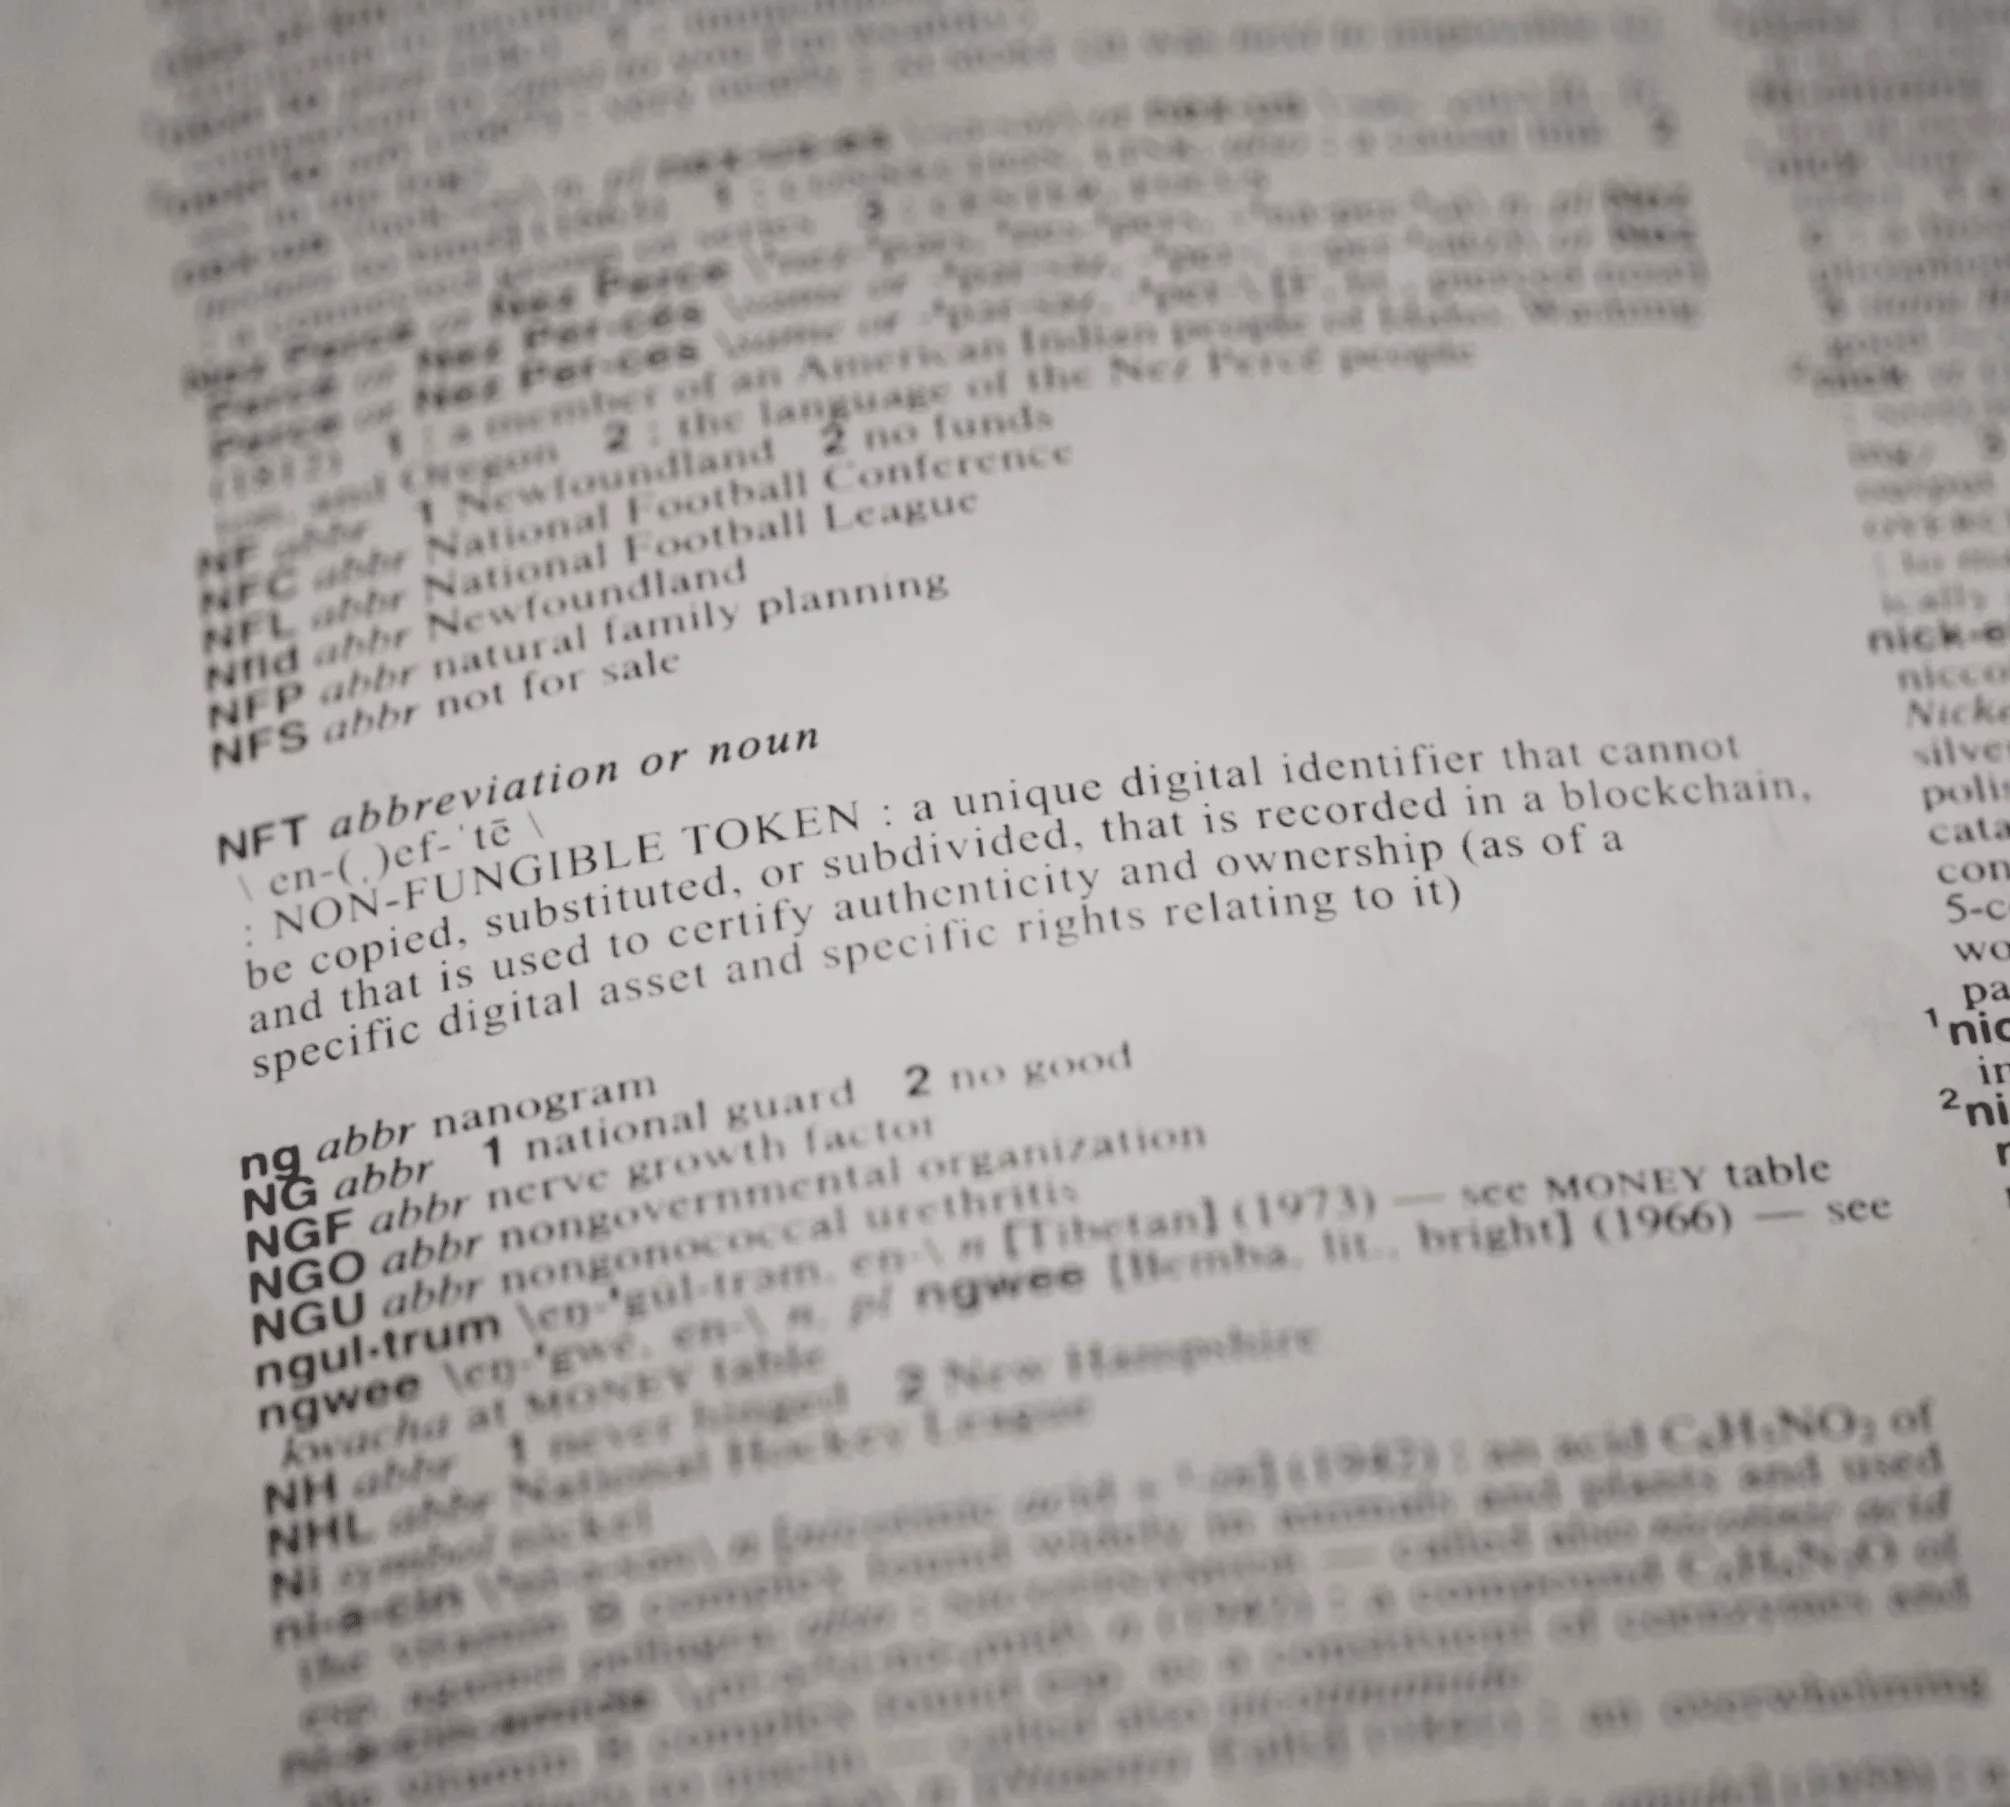 A still image from the NFT "The Definition of NFT" by Merriam-Webster